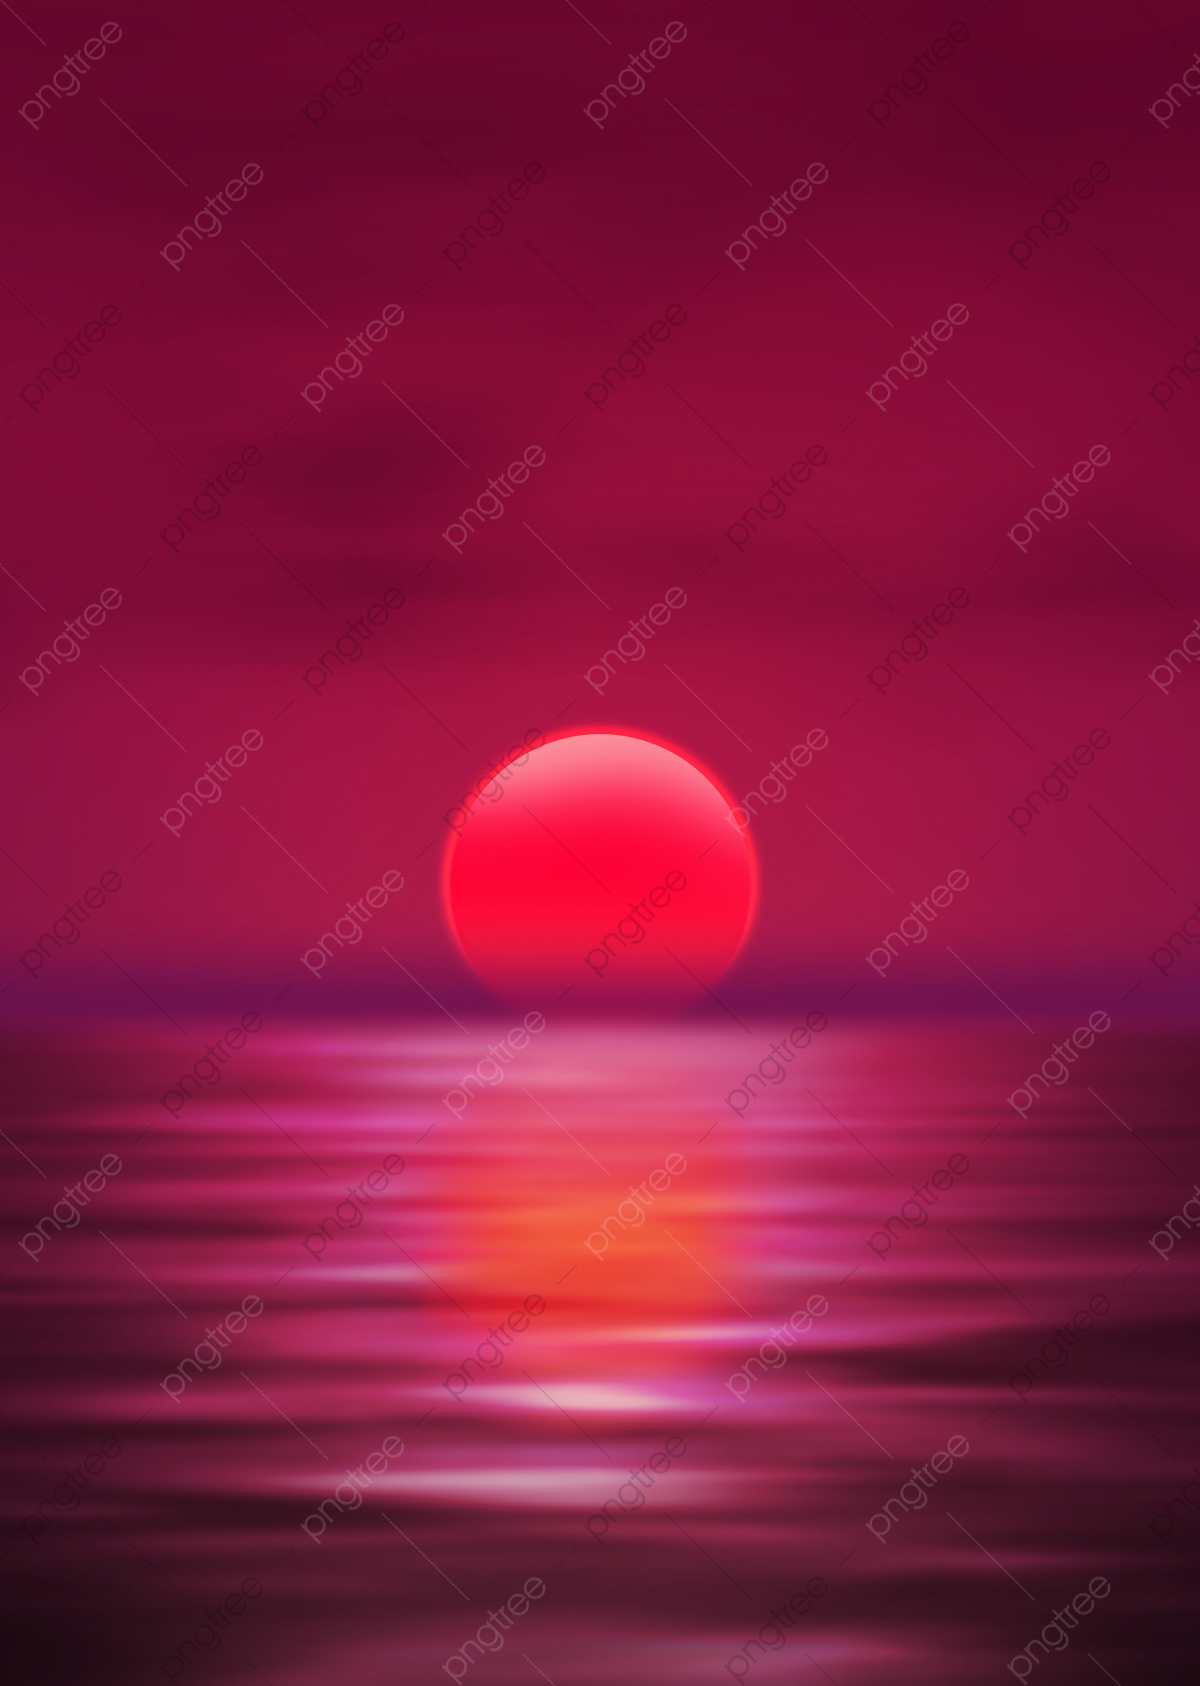 Sunset Tree Red Ocean And Sky Wallpapers